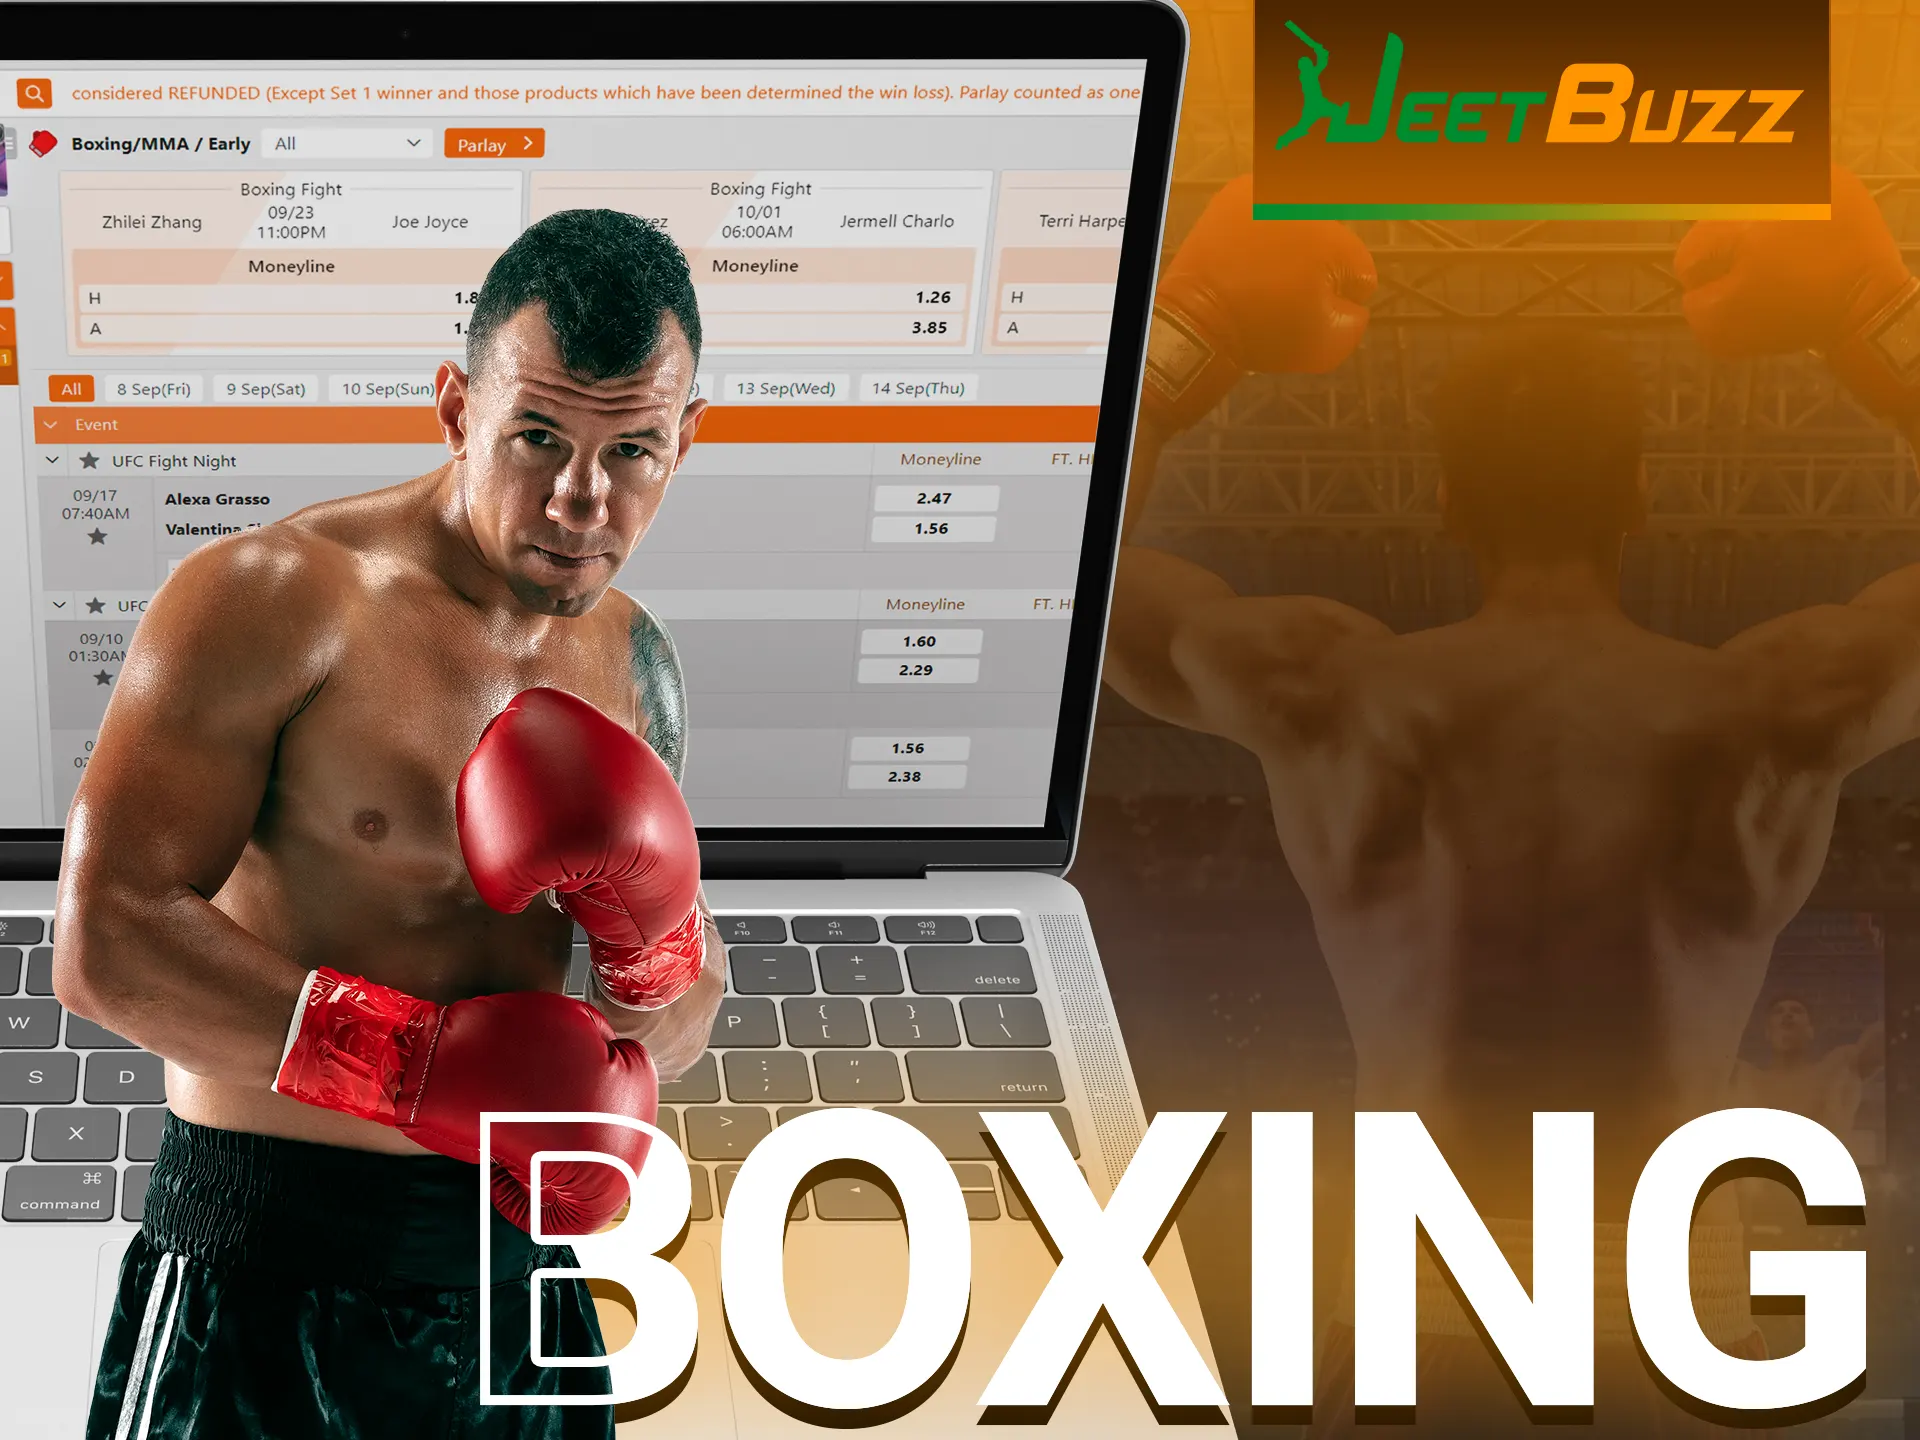 Bet on boxing with Jeetbuzz.